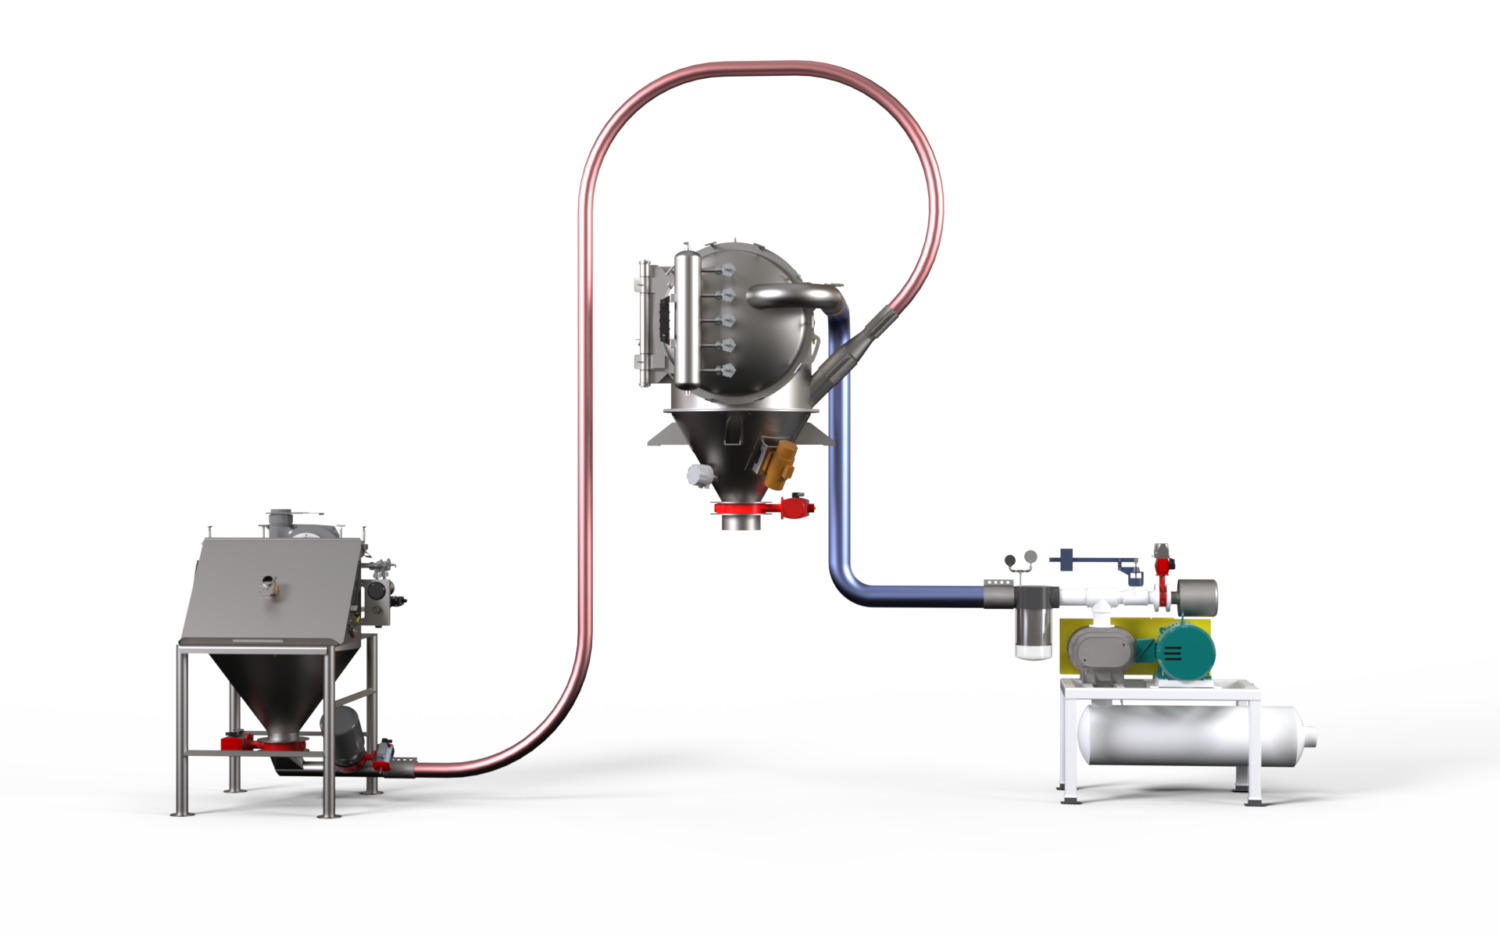 Rendering of the Vacuum dilute phase pneumatic conveying system